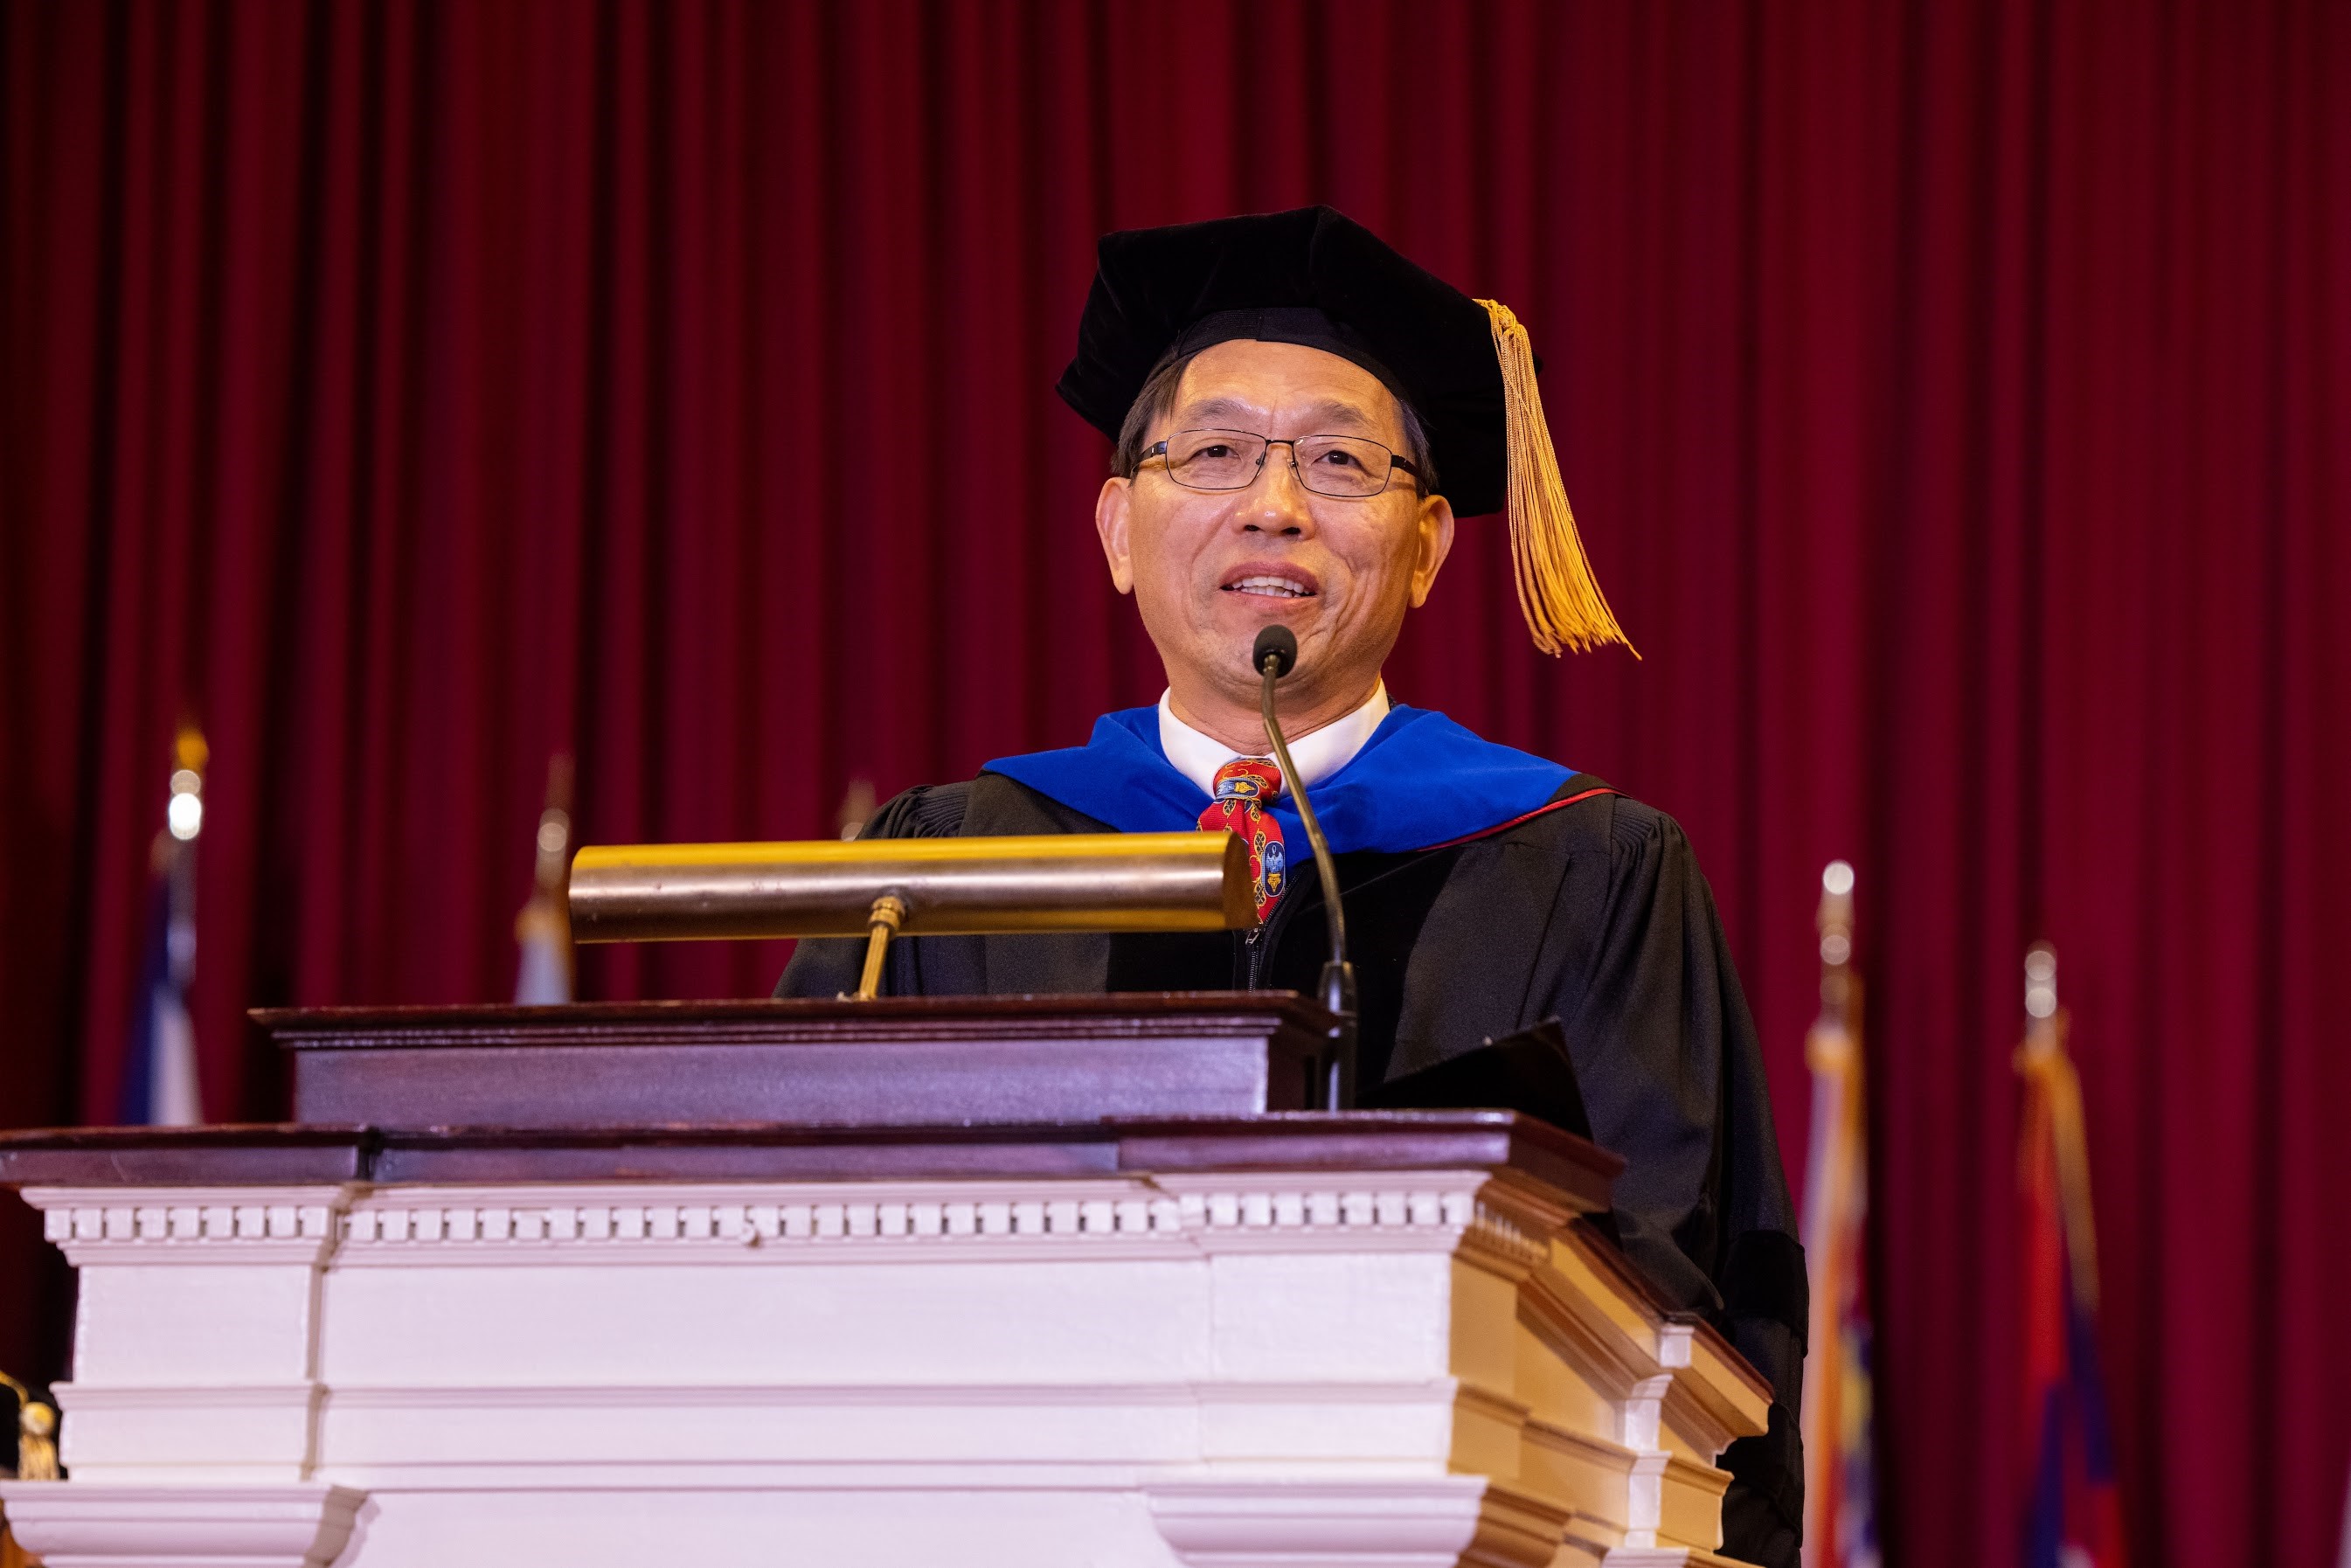 Zhanqing Li speaks at the ceremony in which he was awarded the University of Maryland’s highest academic honor—Distinguished University Professor. Photo courtesy of Zhanqing Li.